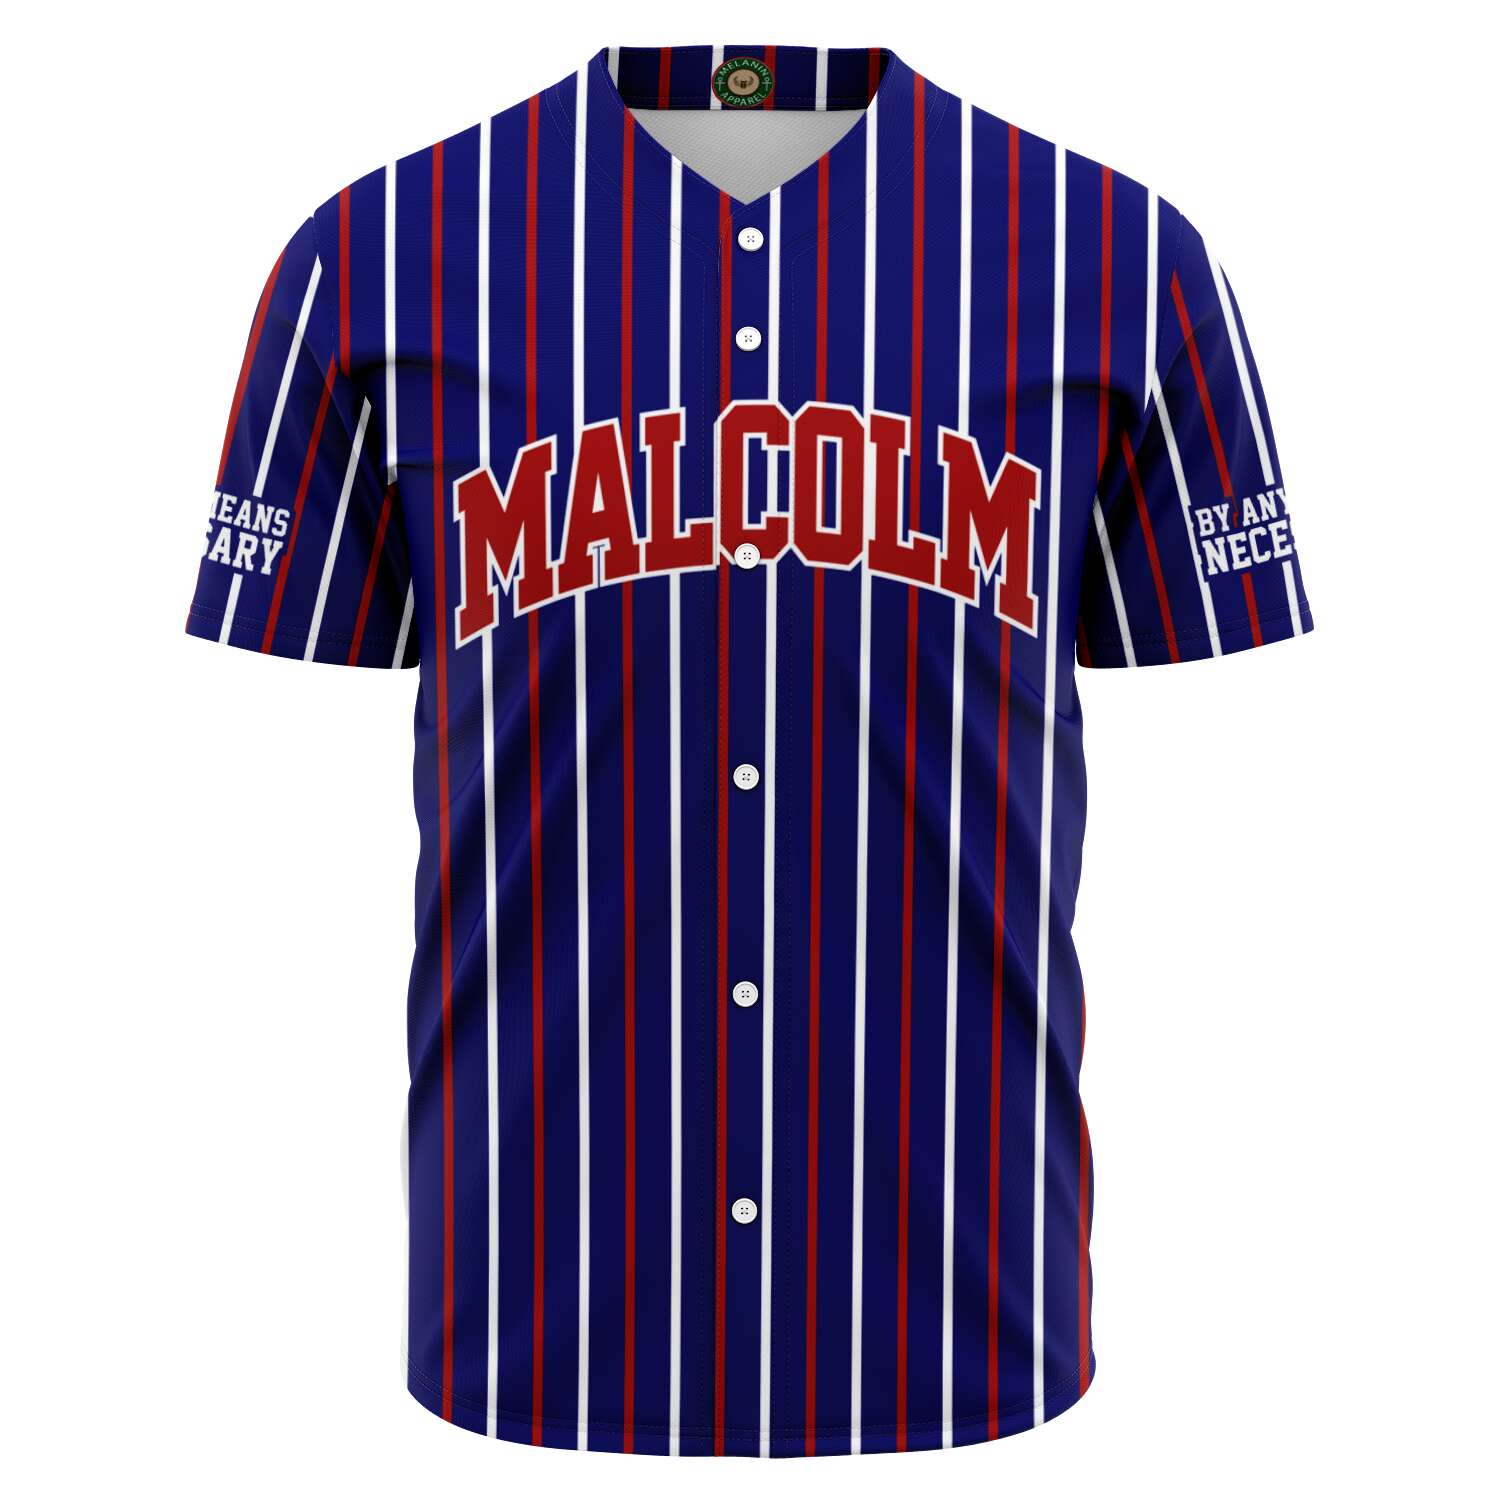 Malcolm x Blue and Red Baseball Jersey 5XL